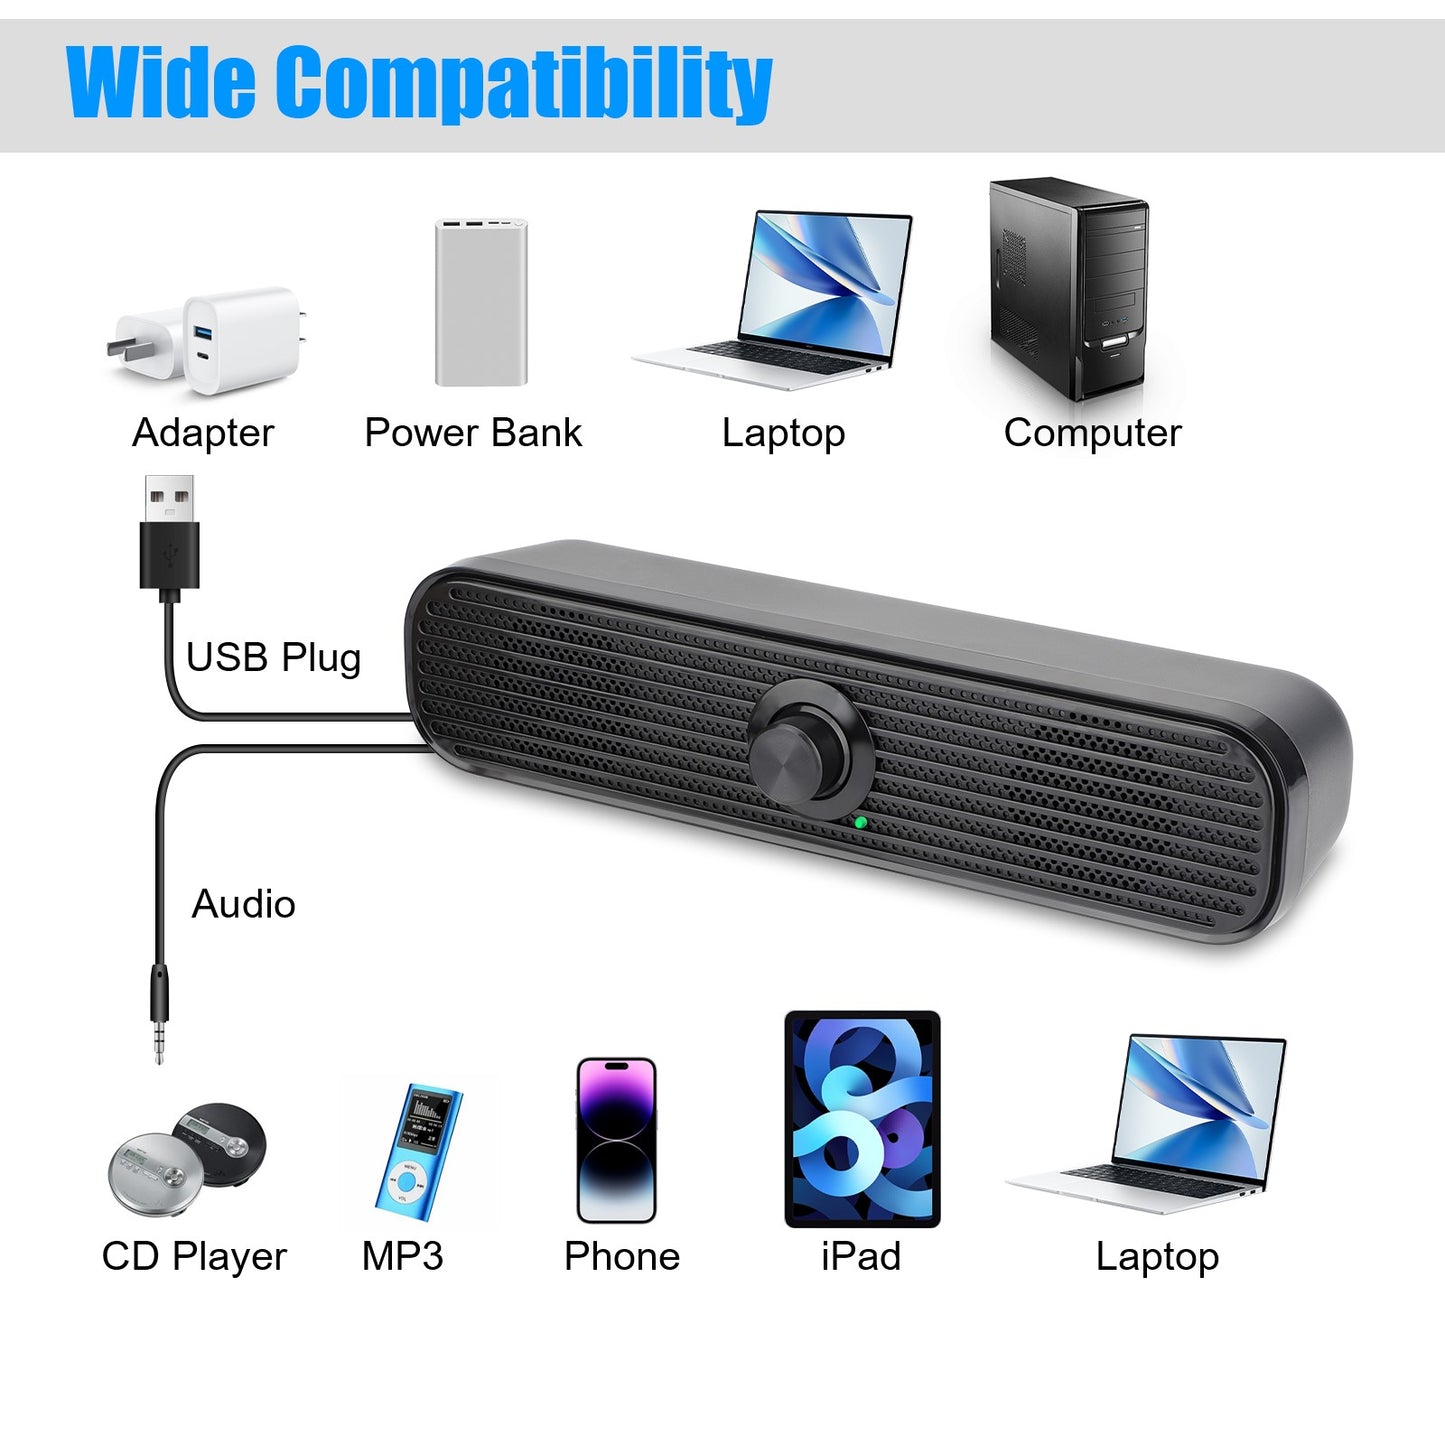 Long Stripes USB Wired Computer Speakers - Big Dial Volume Control, Plug and Play, Stylish Slim Design, for PC Desktop Laptop